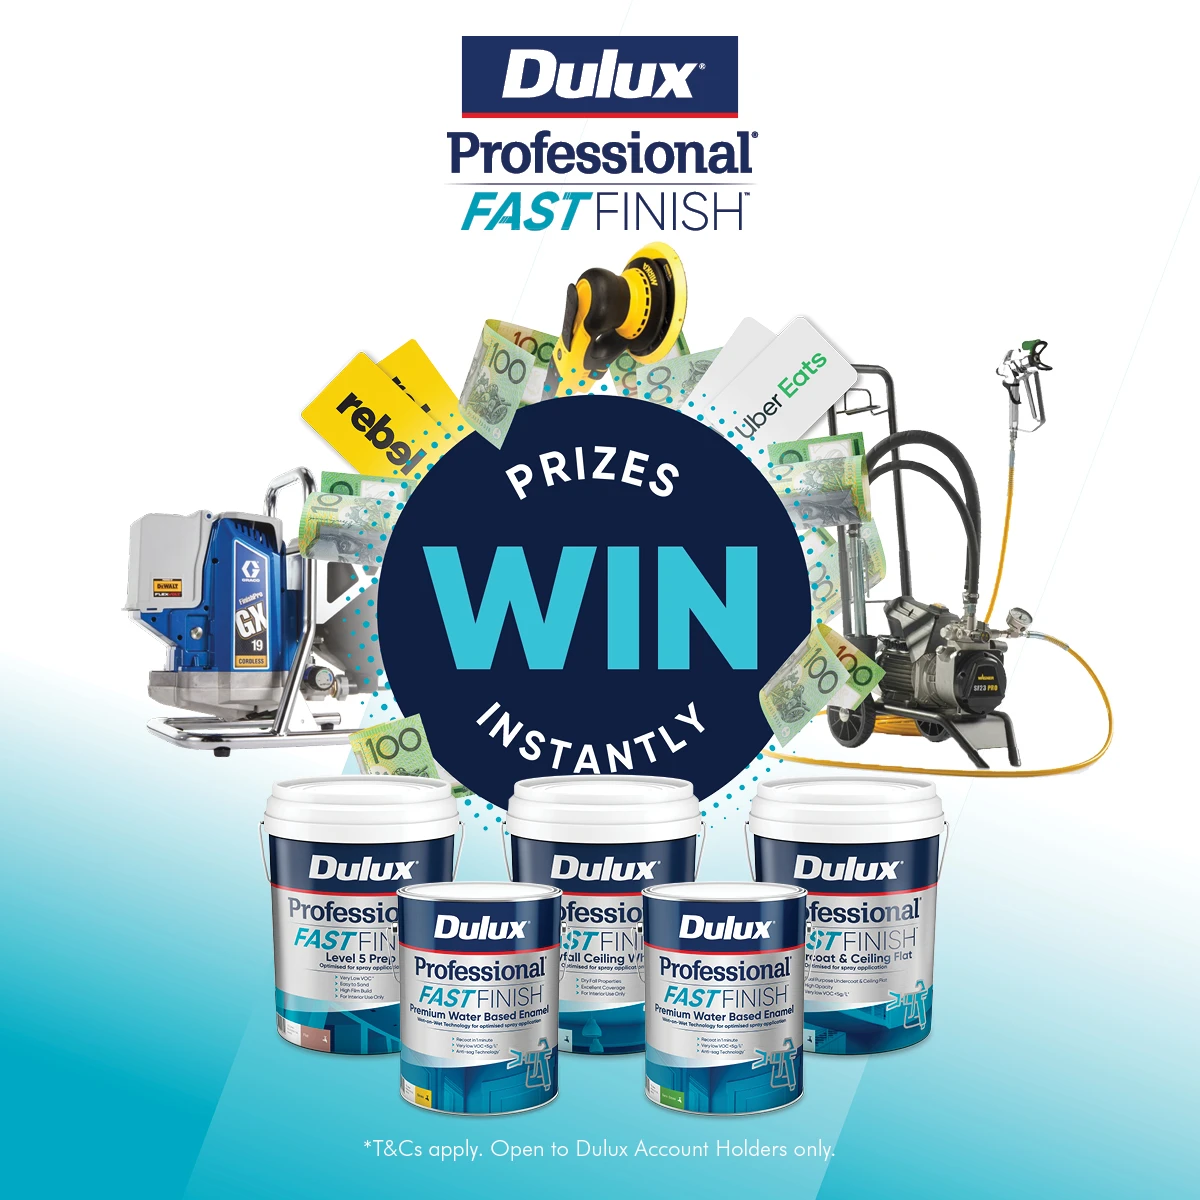 Dulux Professional Fast Finish promo with prizes 